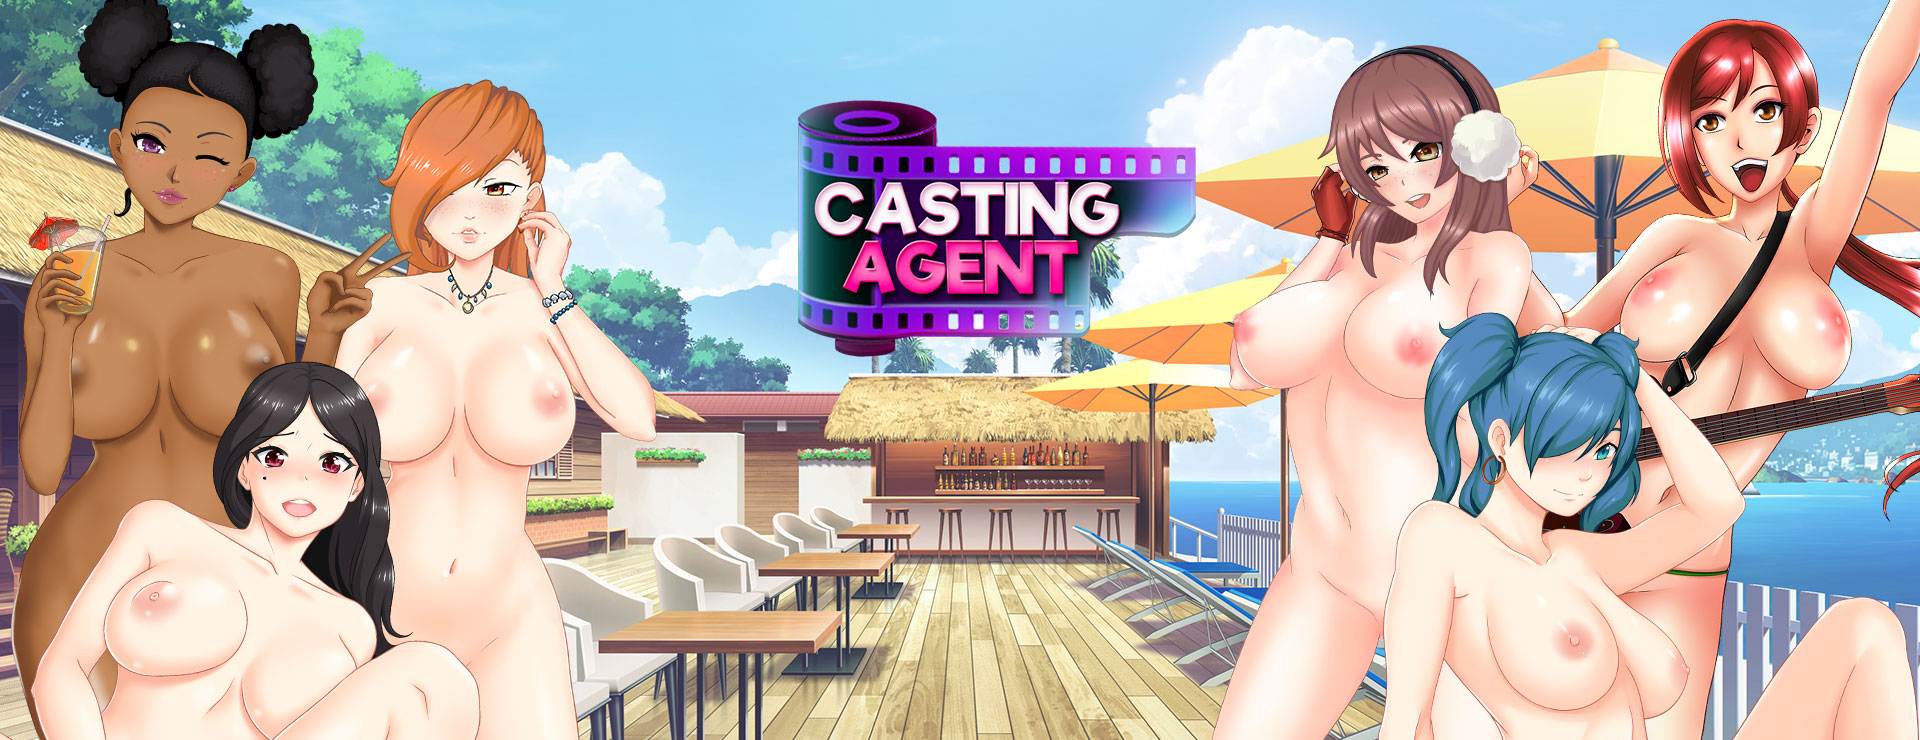 Casting Agent - Casual Game